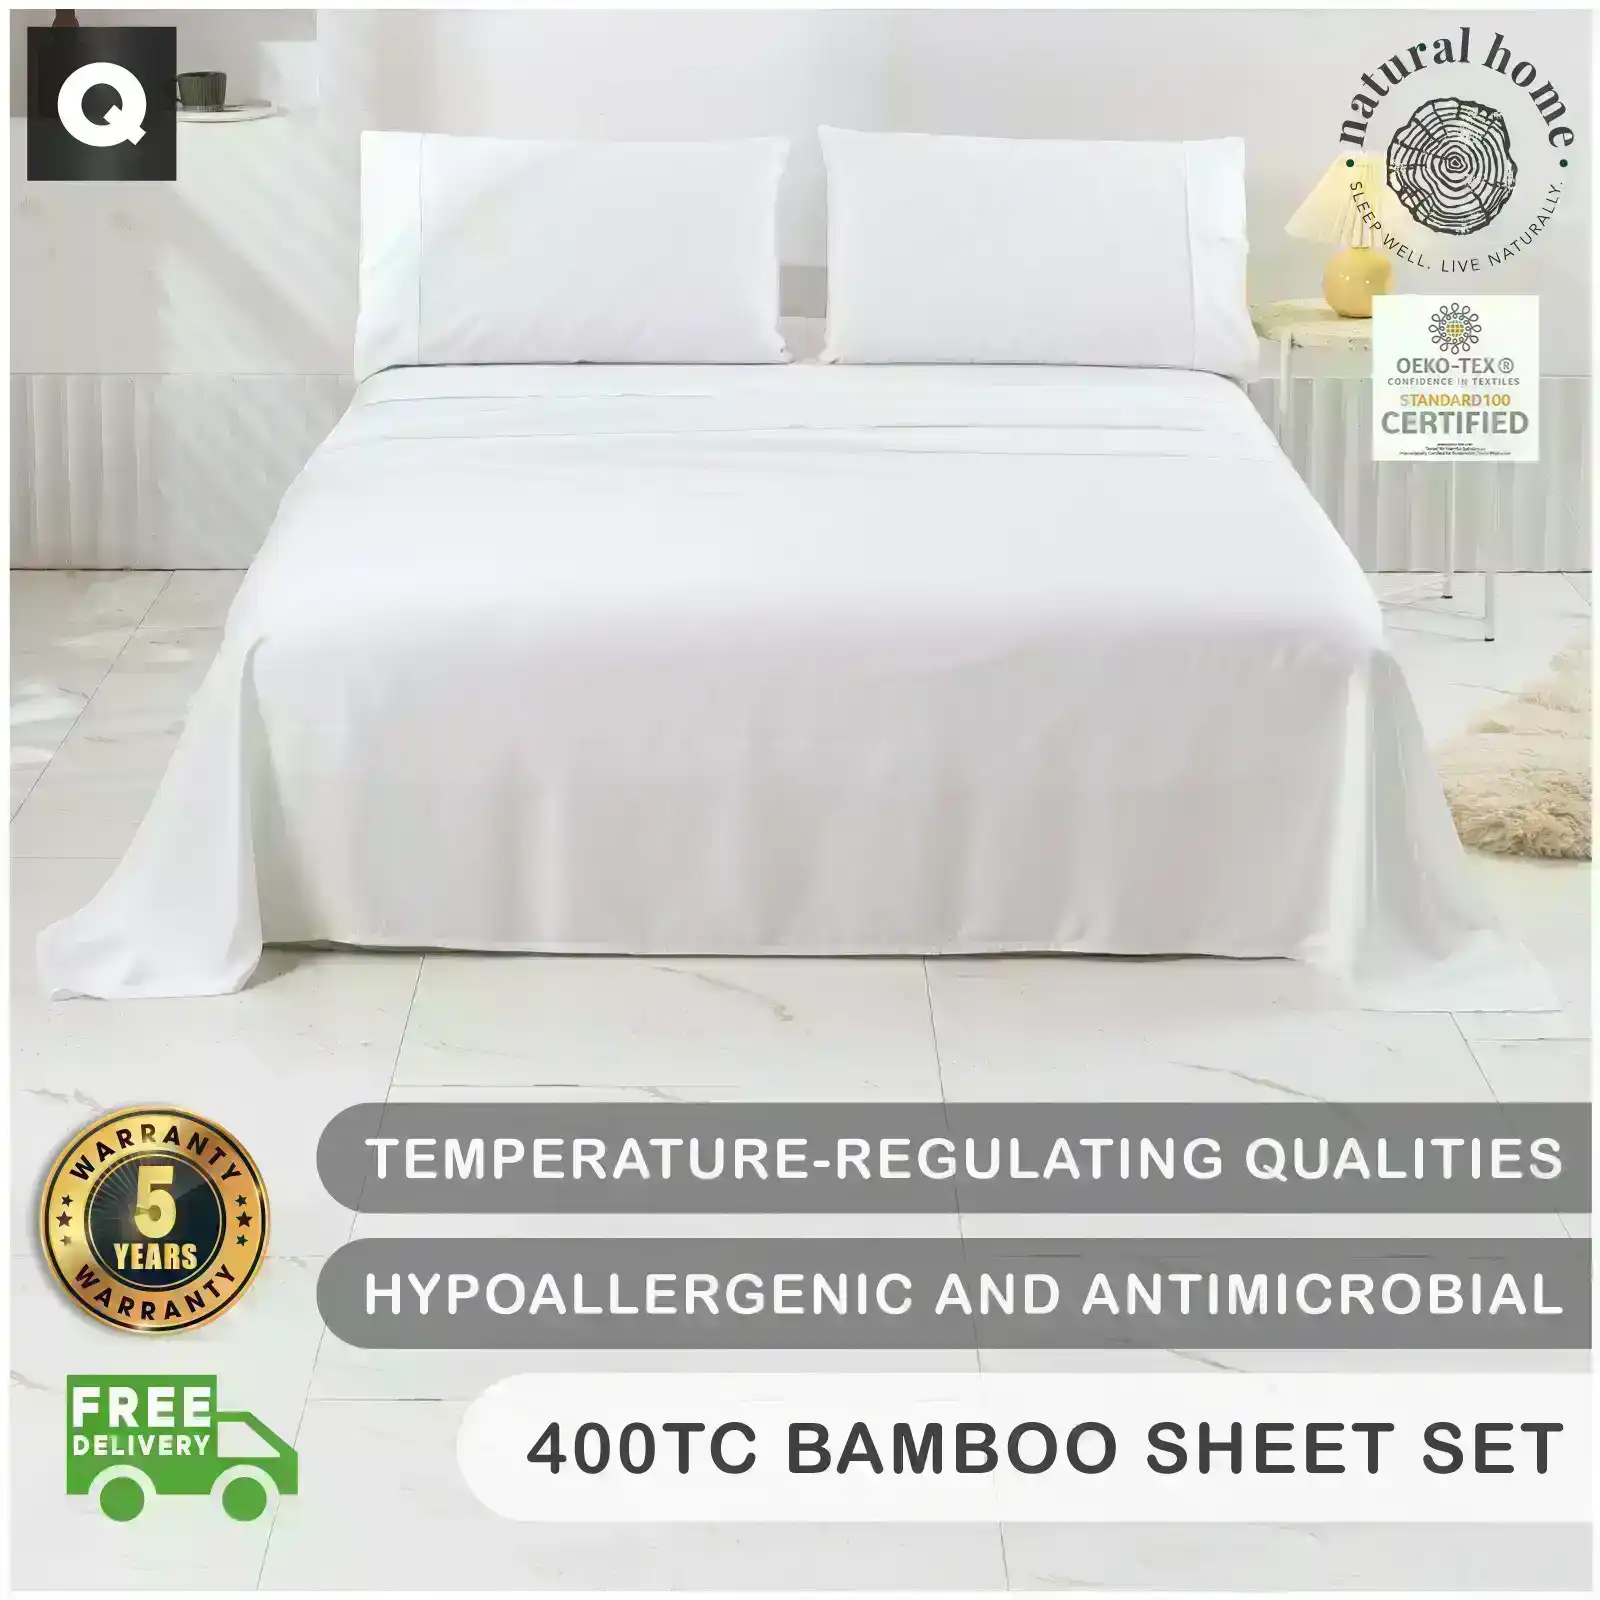 Natural Home Bamboo Sheet Set White Queen Bed